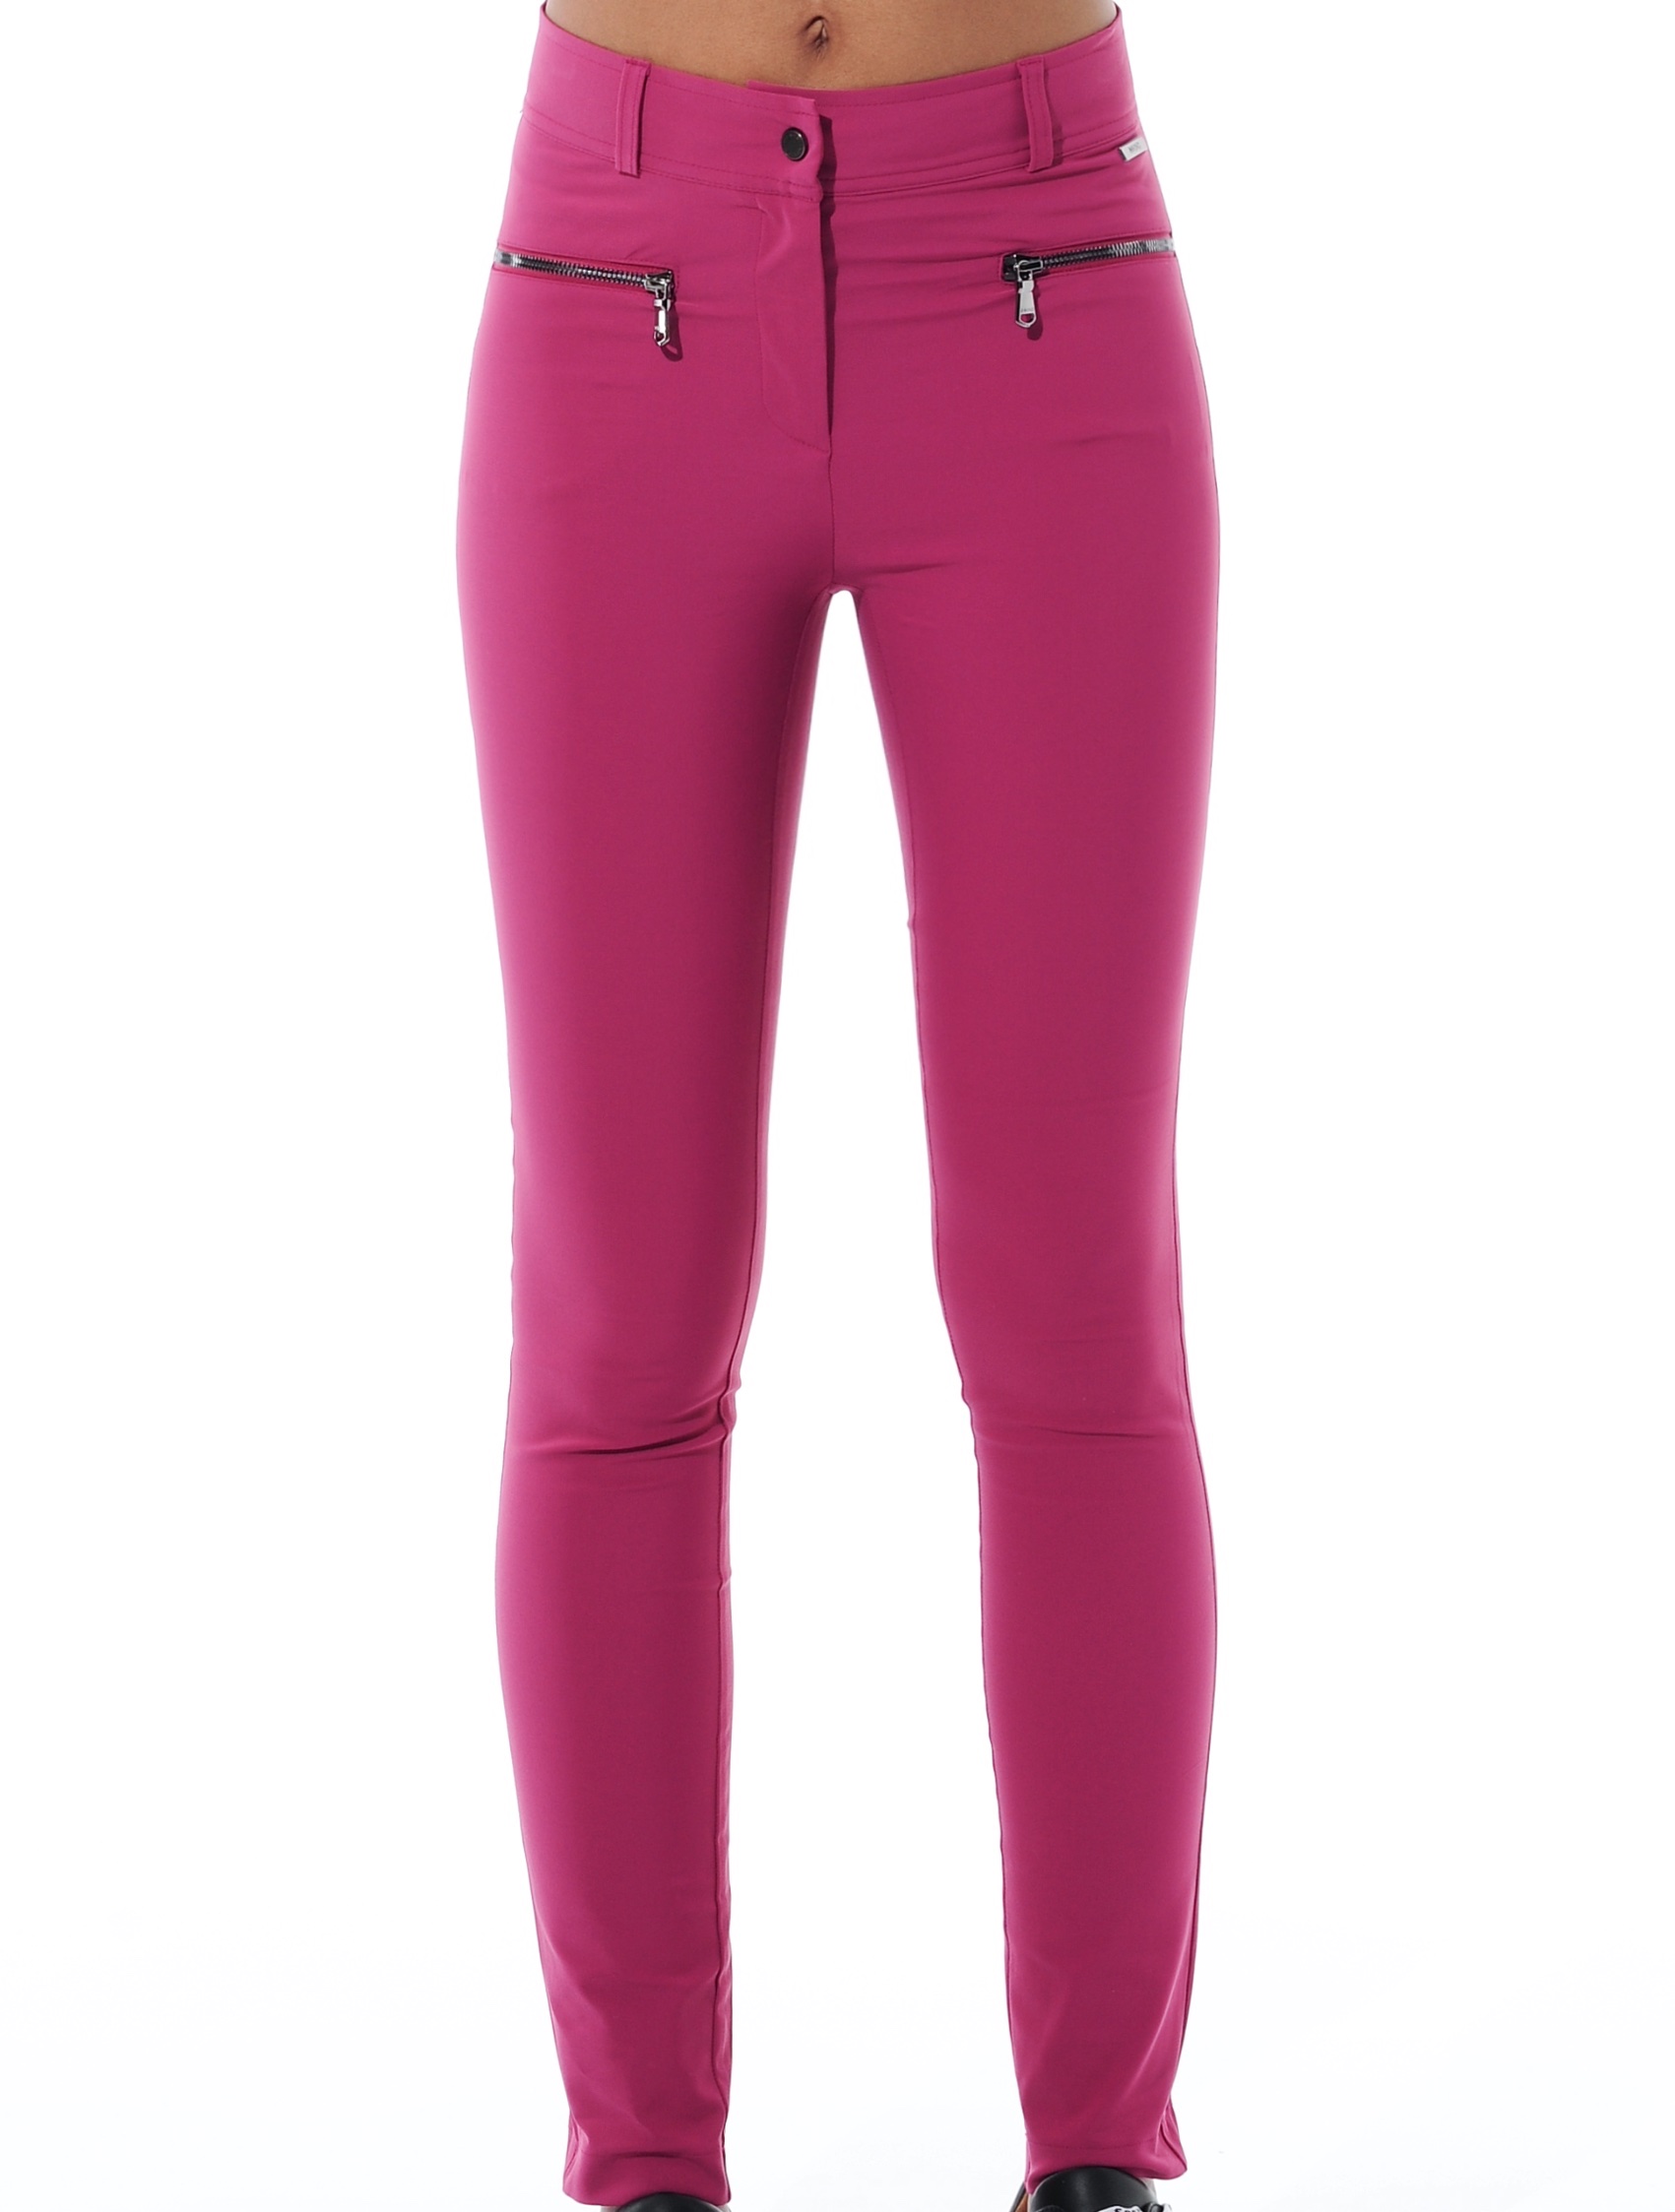 4way stretch jeggings cassis 